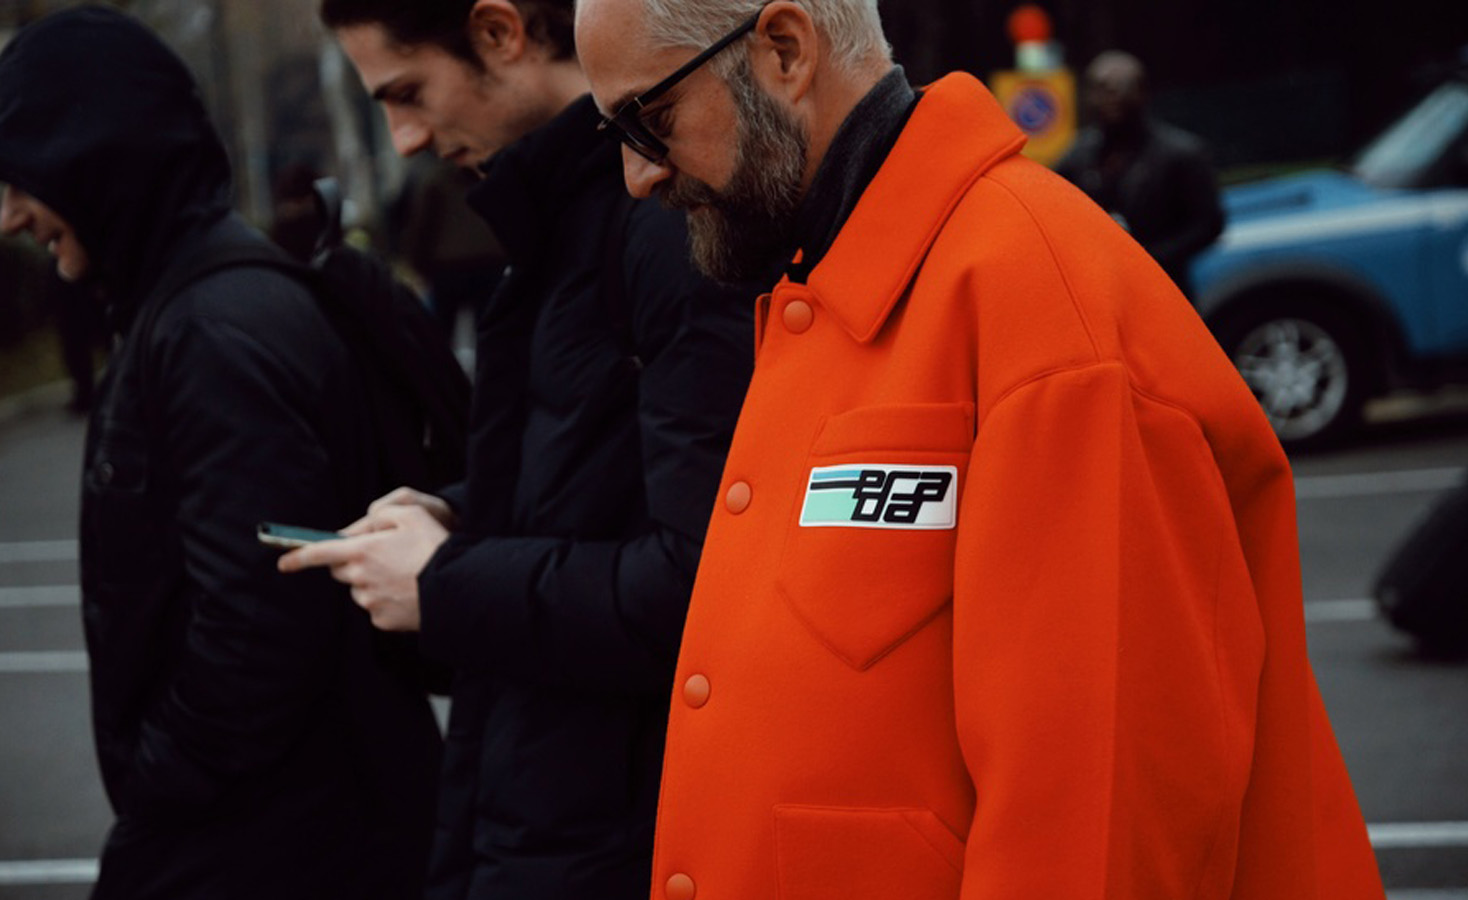 Latest And Greatest Of Menswear From Pitti Uomo